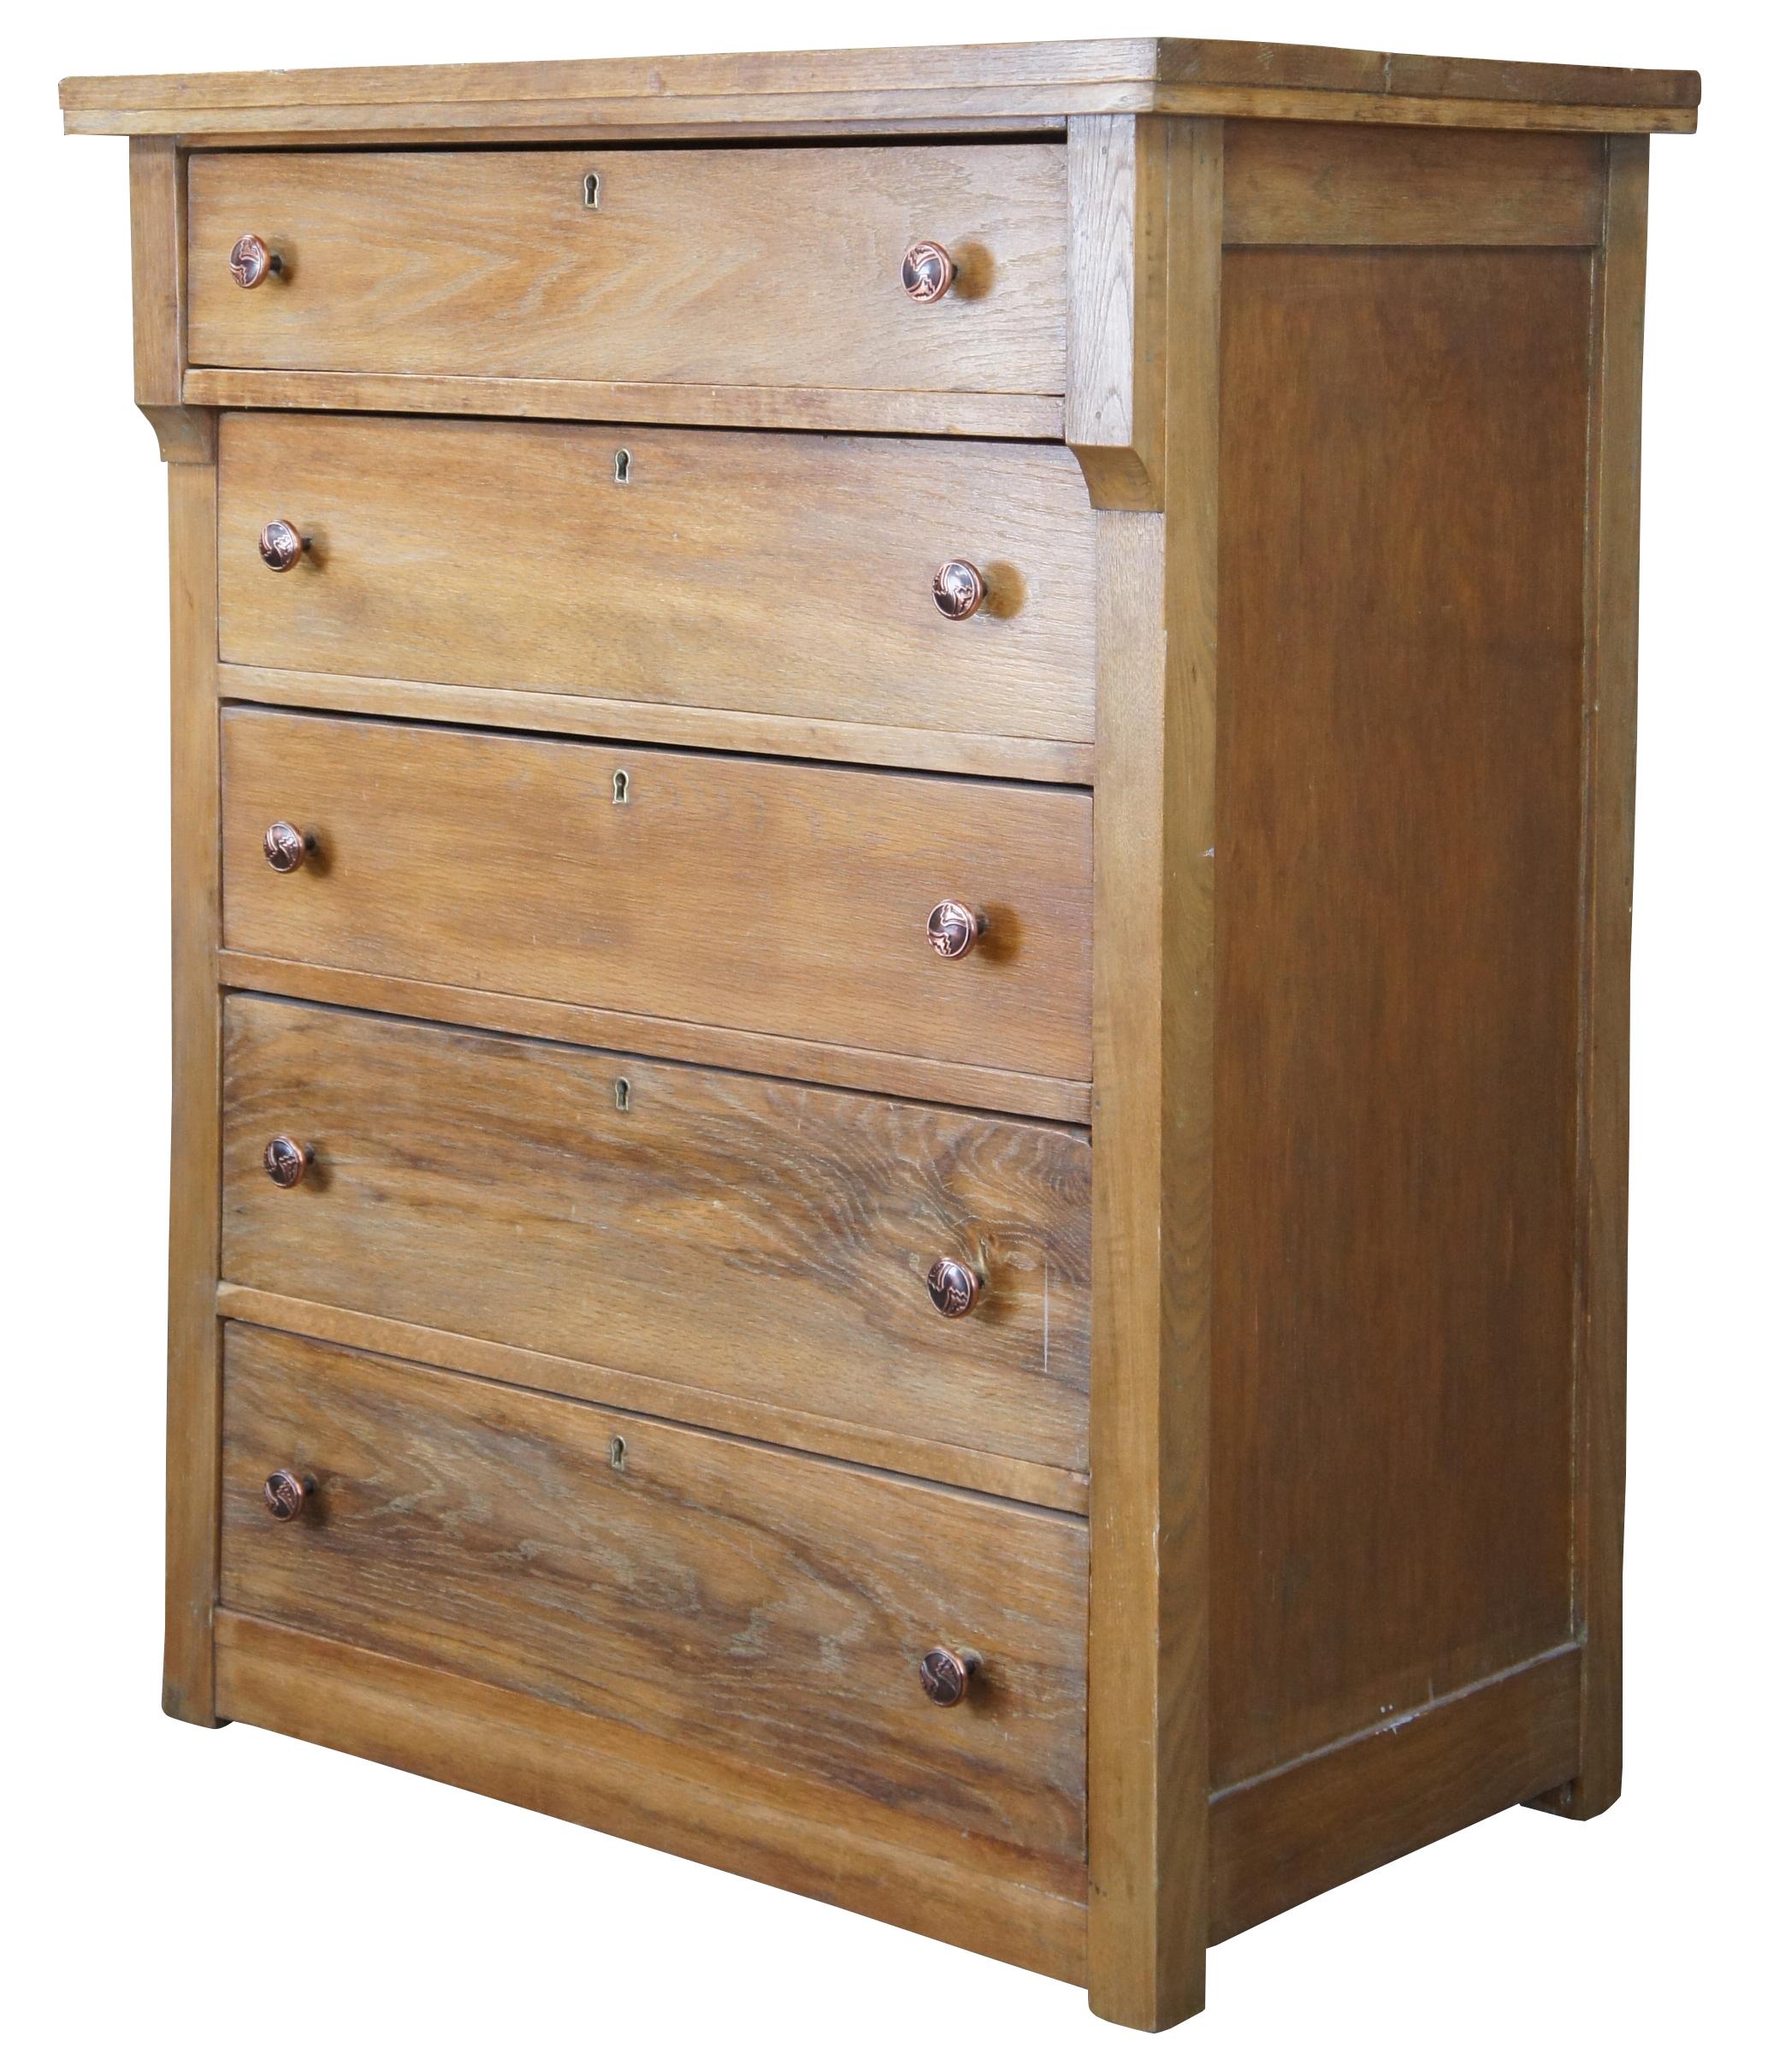 Late Victorian Crescent Line dresser or chest. Made of oak featuring five drawers and southwestern copper pulls. Measure: 39